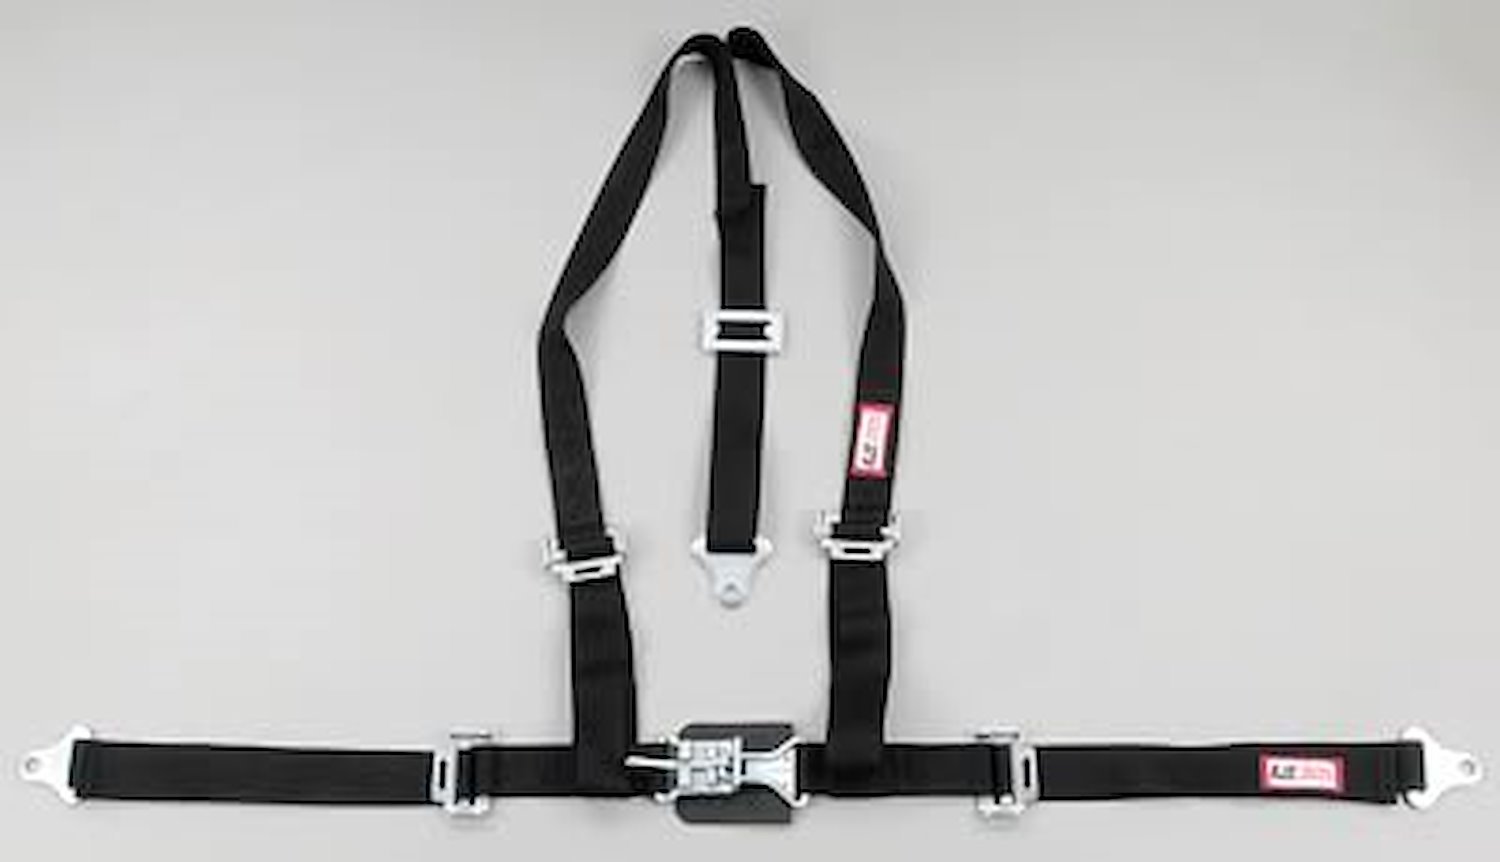 NON-SFI L&L HARNESS 2 PULL DOWN Lap Belt SNAP SEWN IN 2 S.H. Individual ROLL BAR Mount w/STERNUM STRAP WRAP/BOLT RED